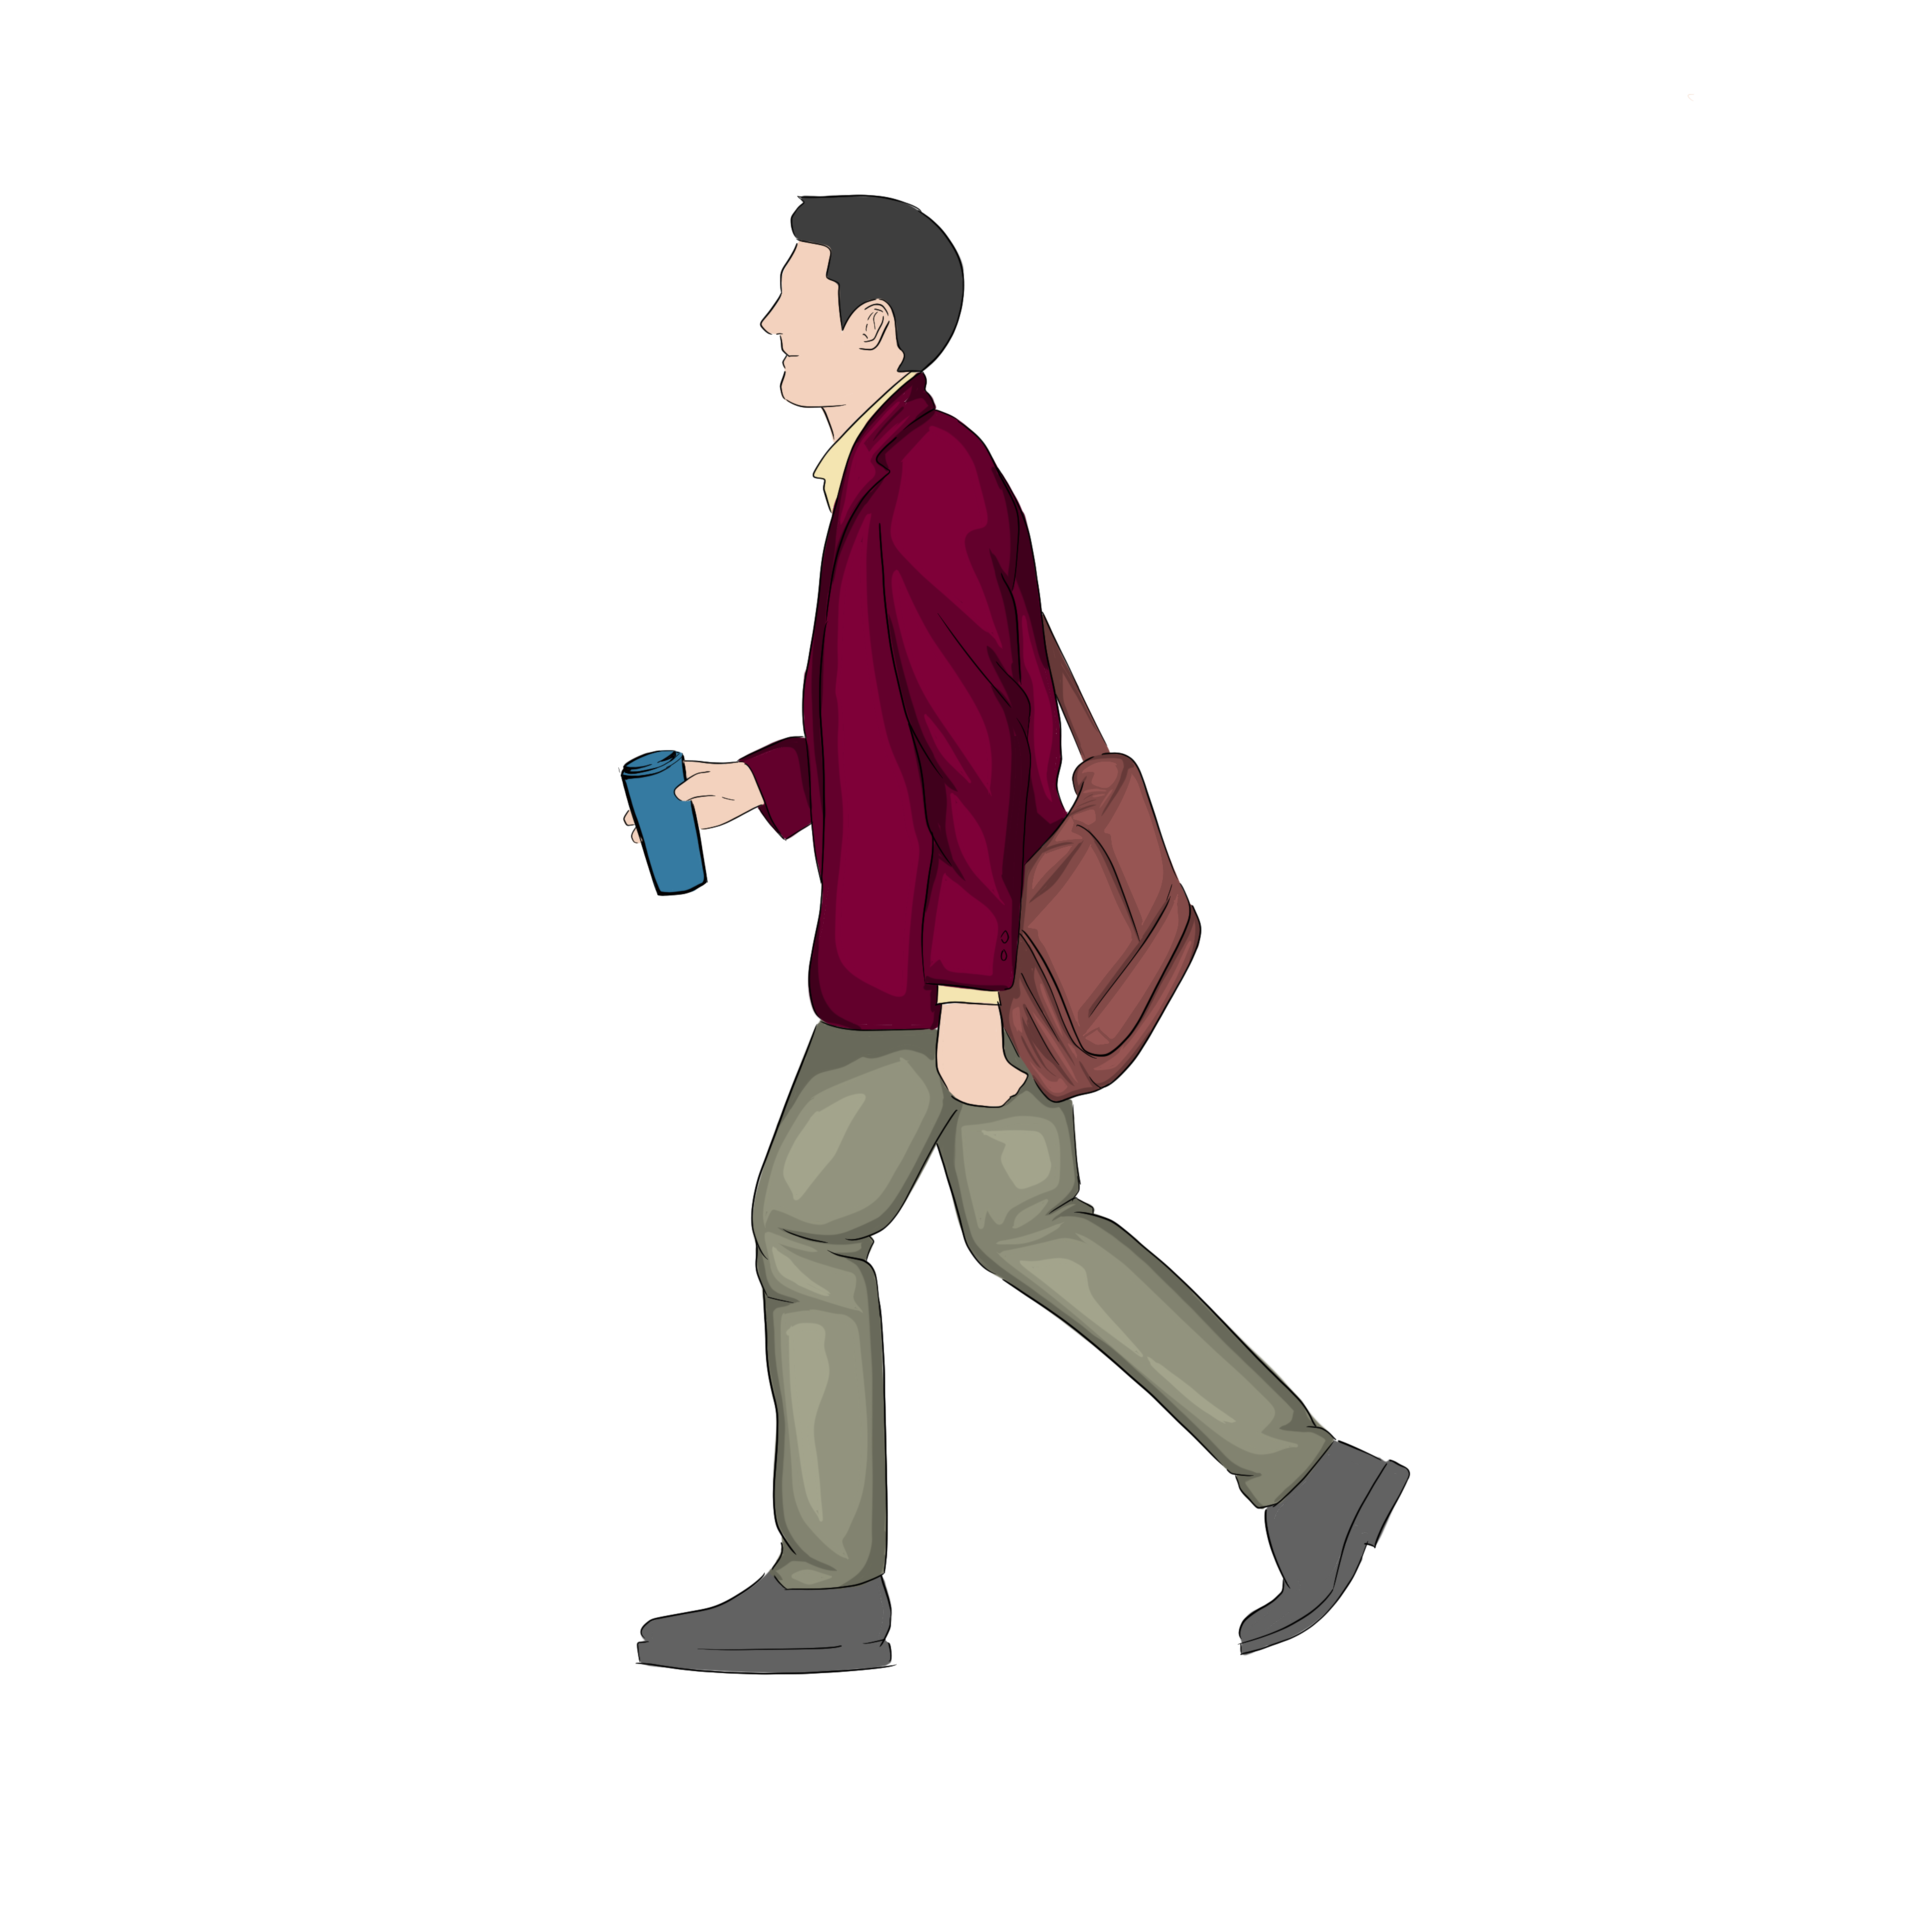 Office worker walking element graphic design 11191549 PNG